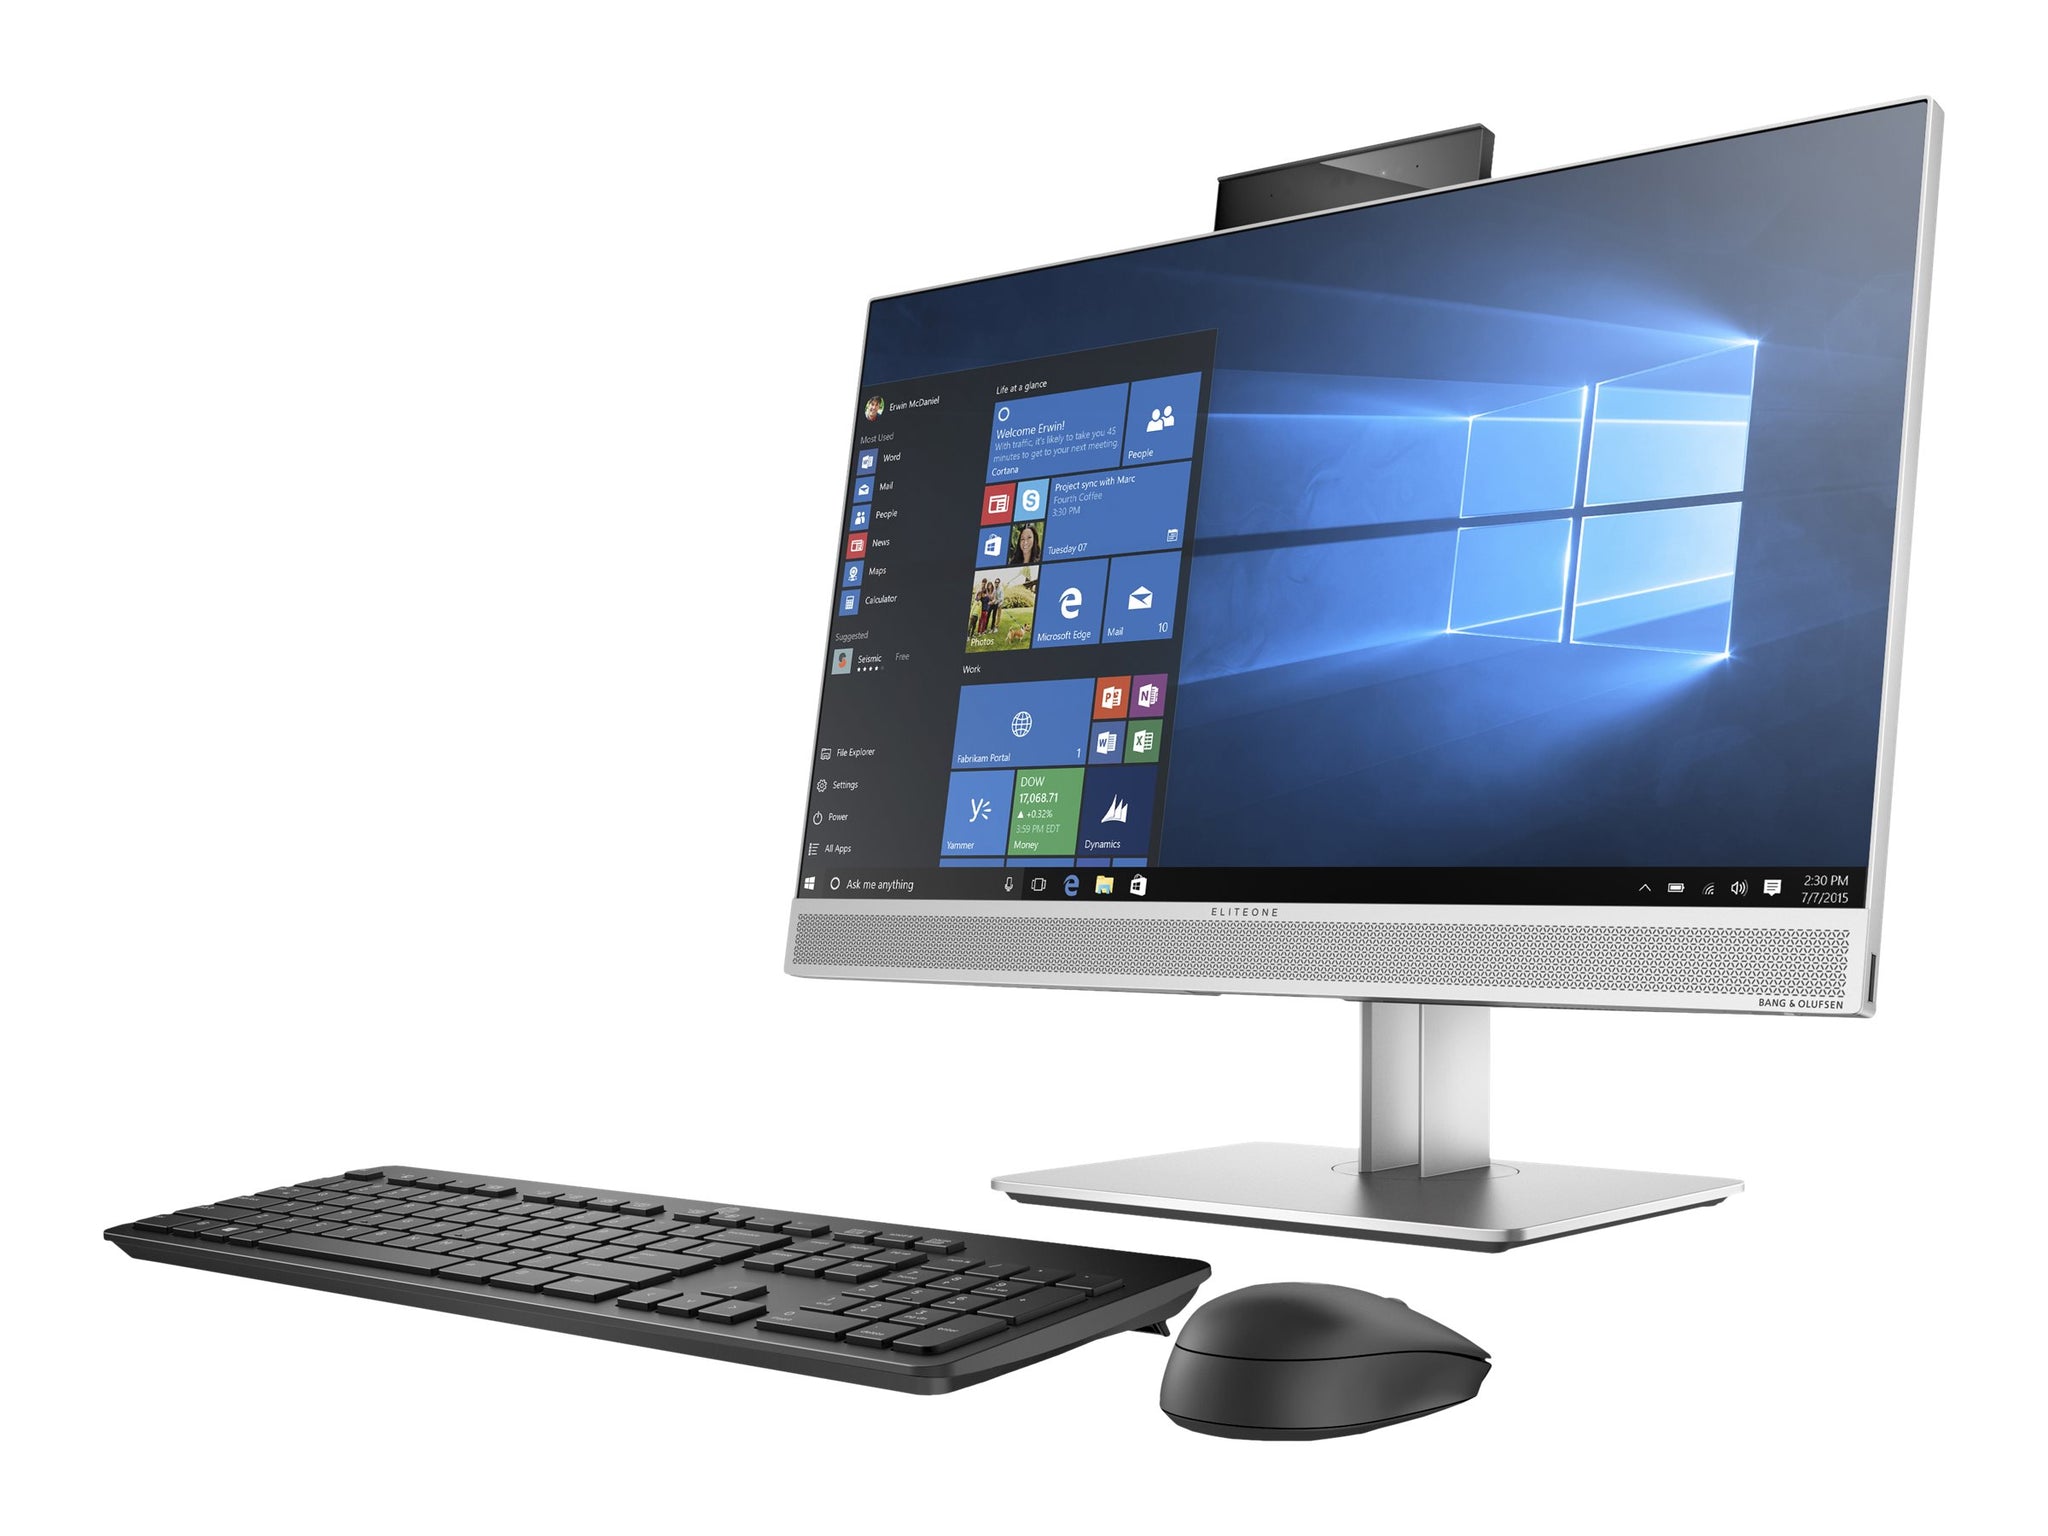 HP EliteDesk 800 G4 23.8-inch NonTouch All-in-One PC - I5-8500 8GB 1TB W10P Refurbished